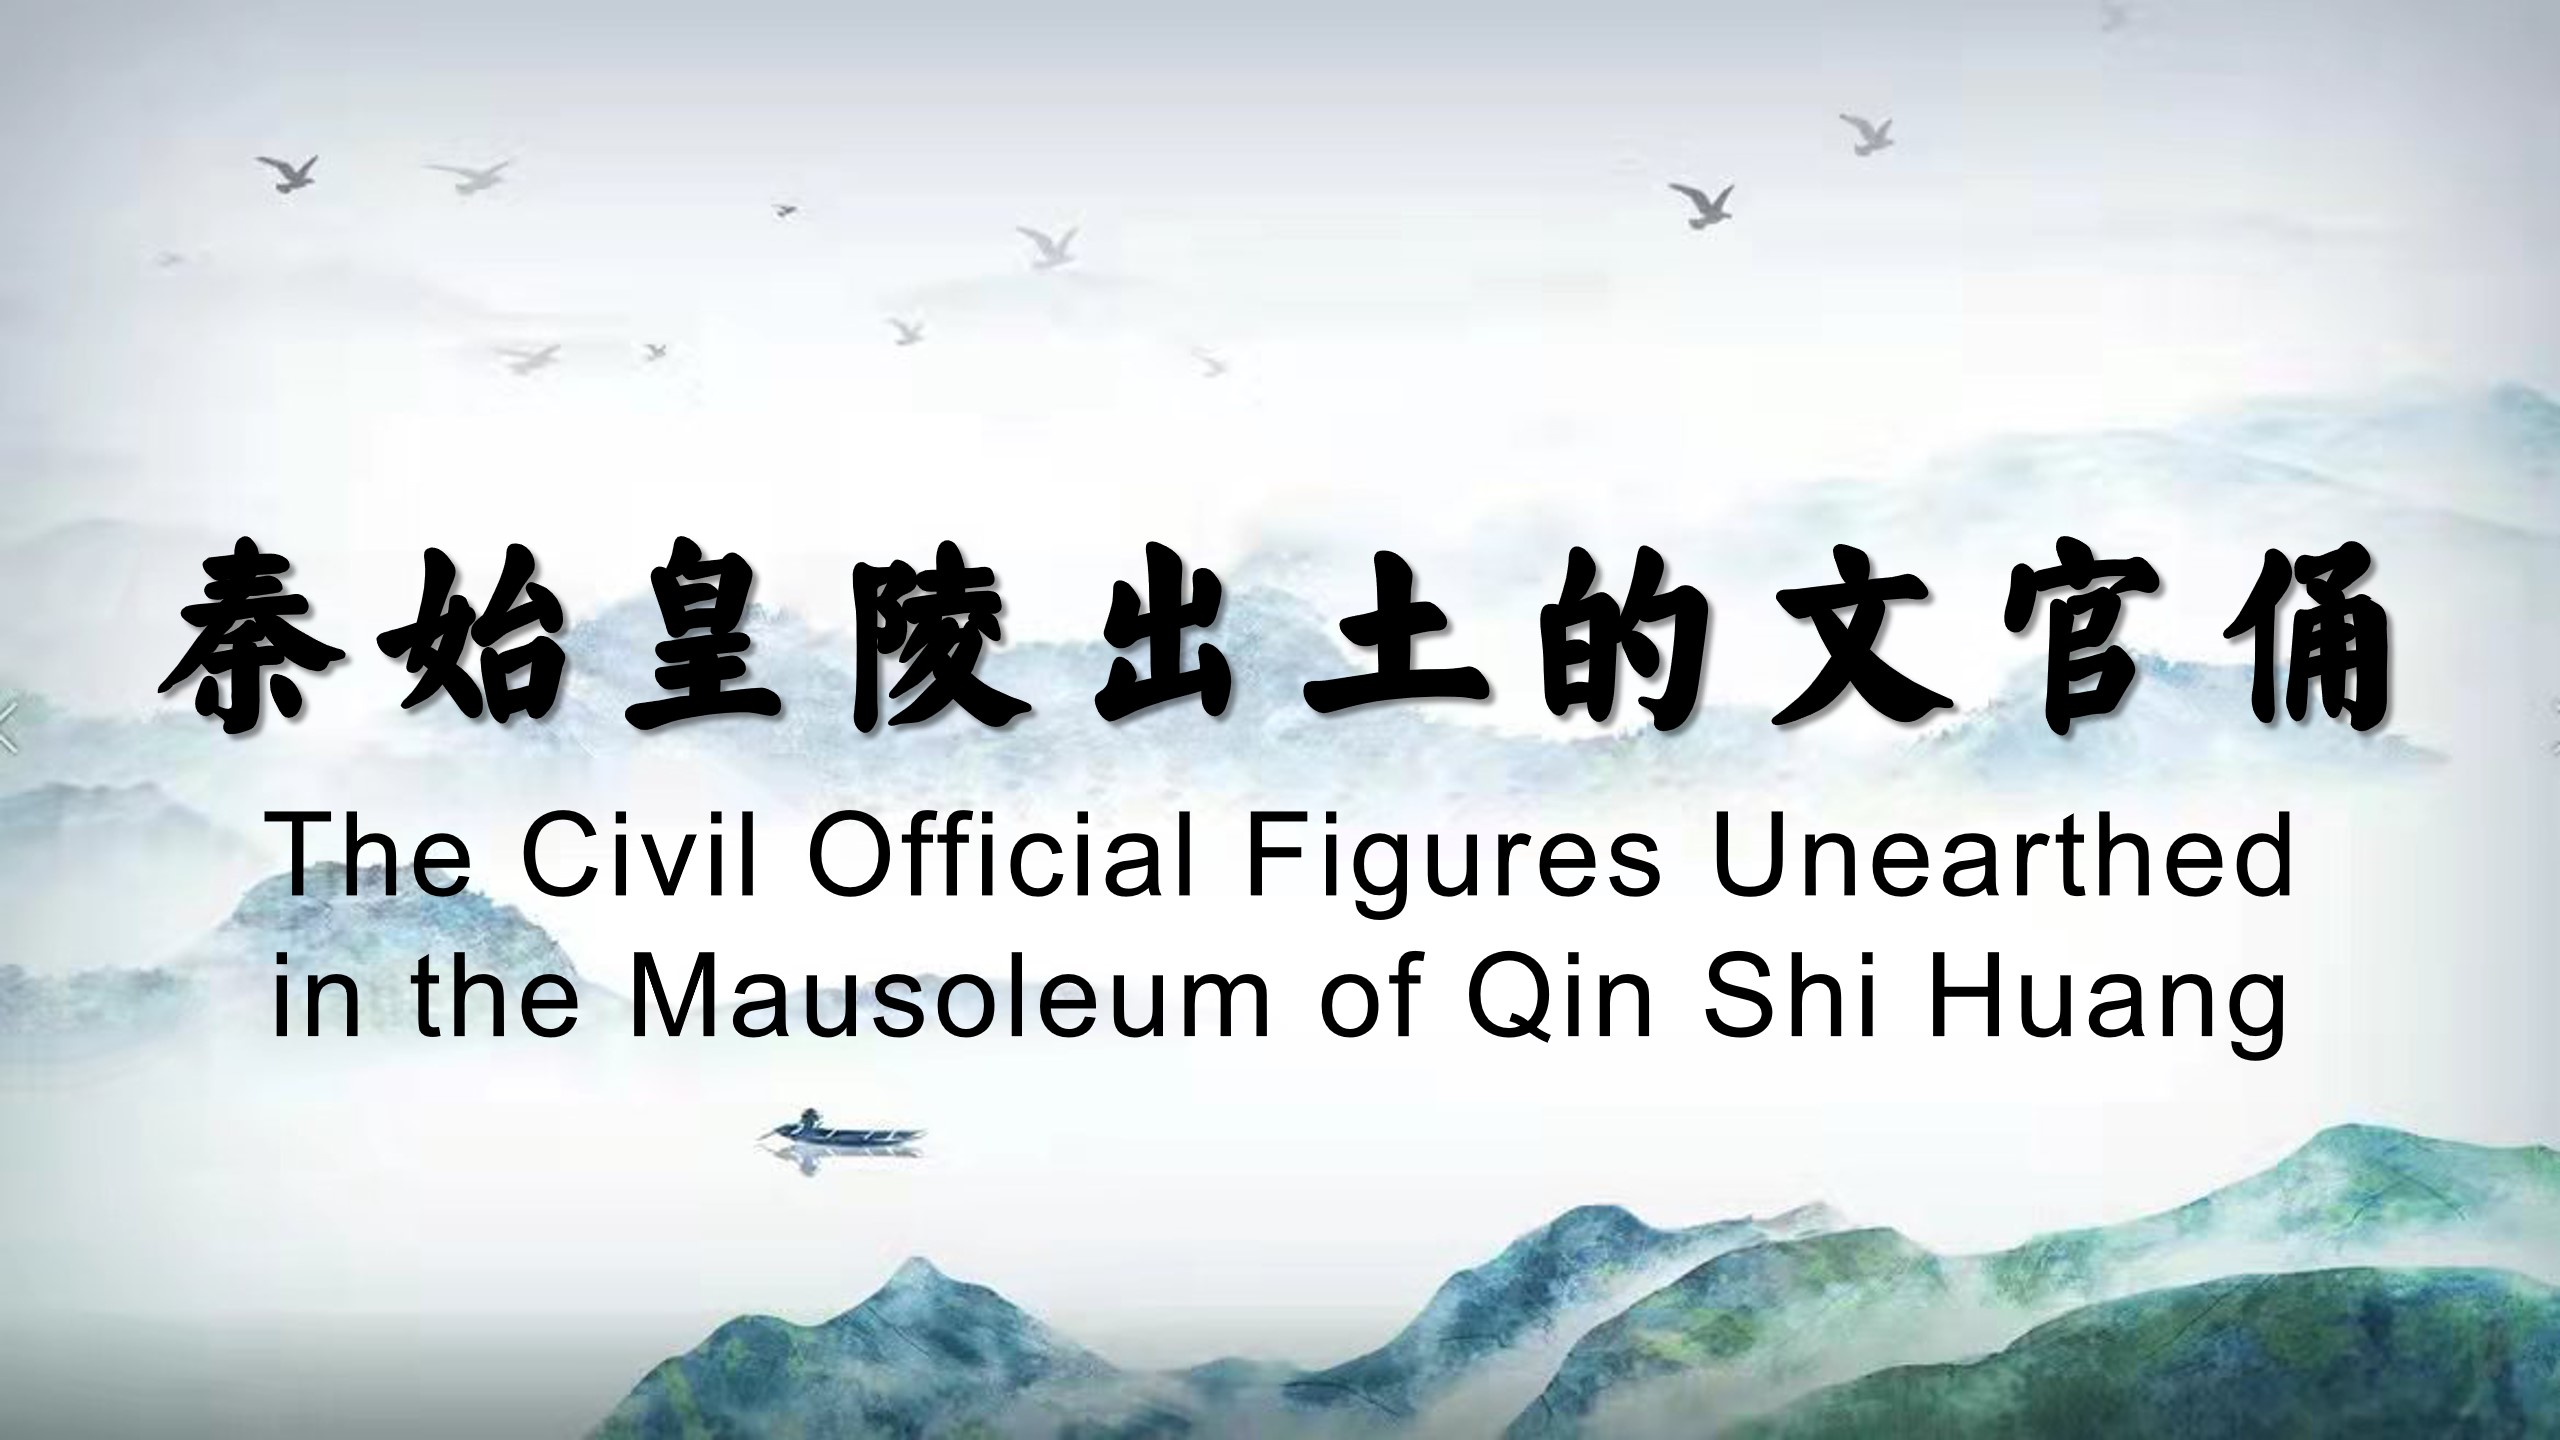 The Civil Official Figures Unearthed in the Mausoleum of Qin Shi Huang